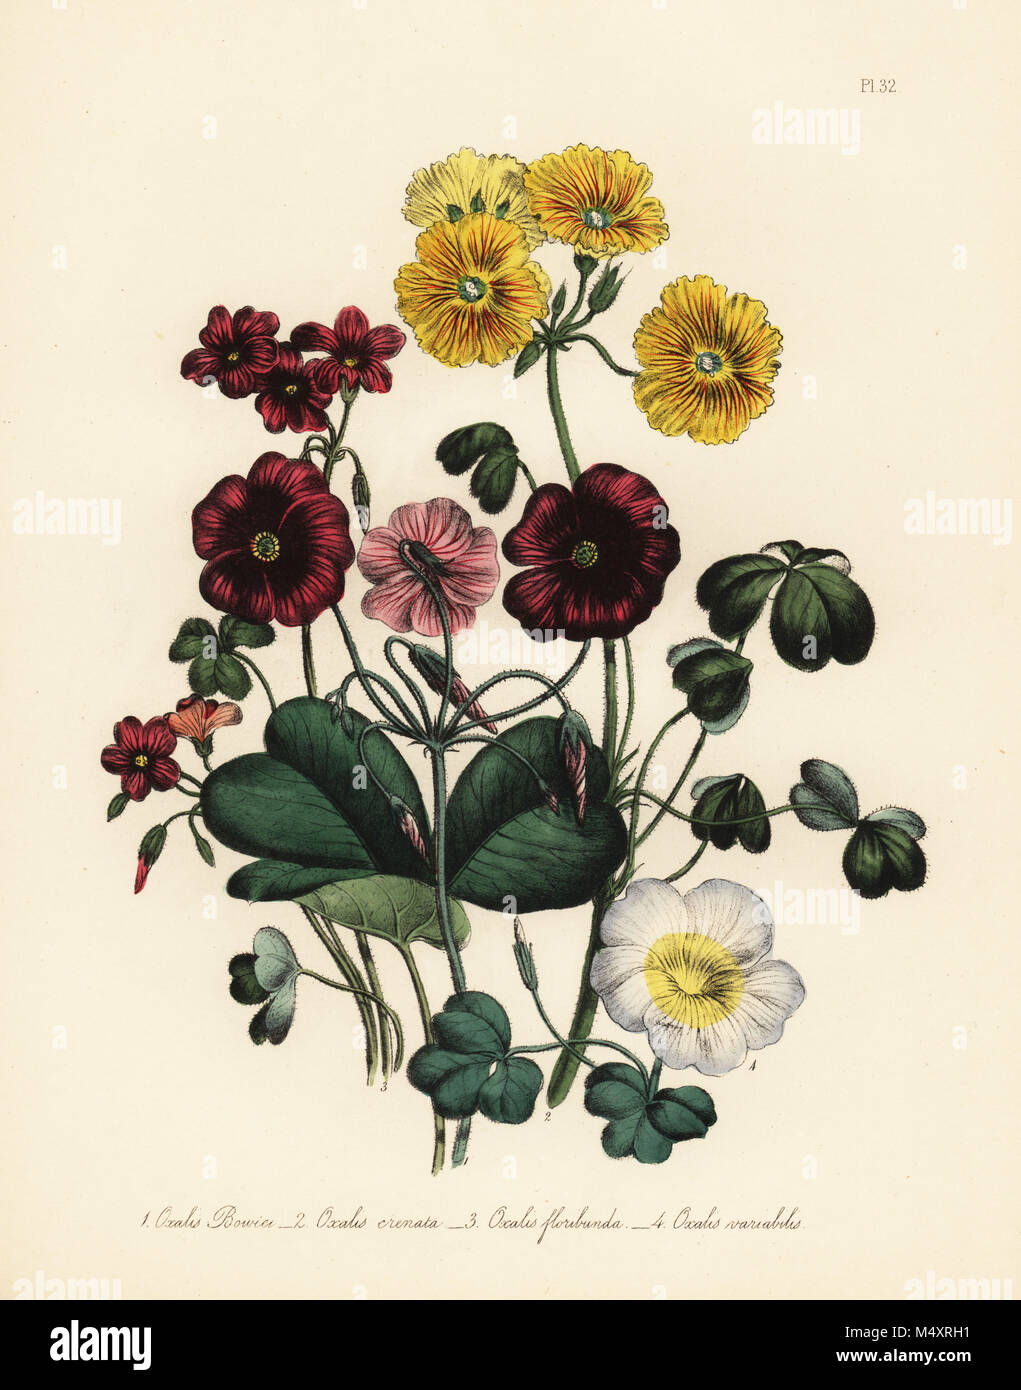 Mr. Bowie's oxalis, Oxalis bowiei, scalloped wood-sorrel, Oxalis crenata, many-flowered oxalis, Oxalis floribunda, and variable oxalis, Oxalis variabilis. Handfinished chromolithograph by Henry Noel Humphreys after an illustration by Jane Loudon from Mrs. Jane Loudon's Ladies Flower Garden of Ornamental Perennials, William S. Orr, London, 1849. Stock Photo